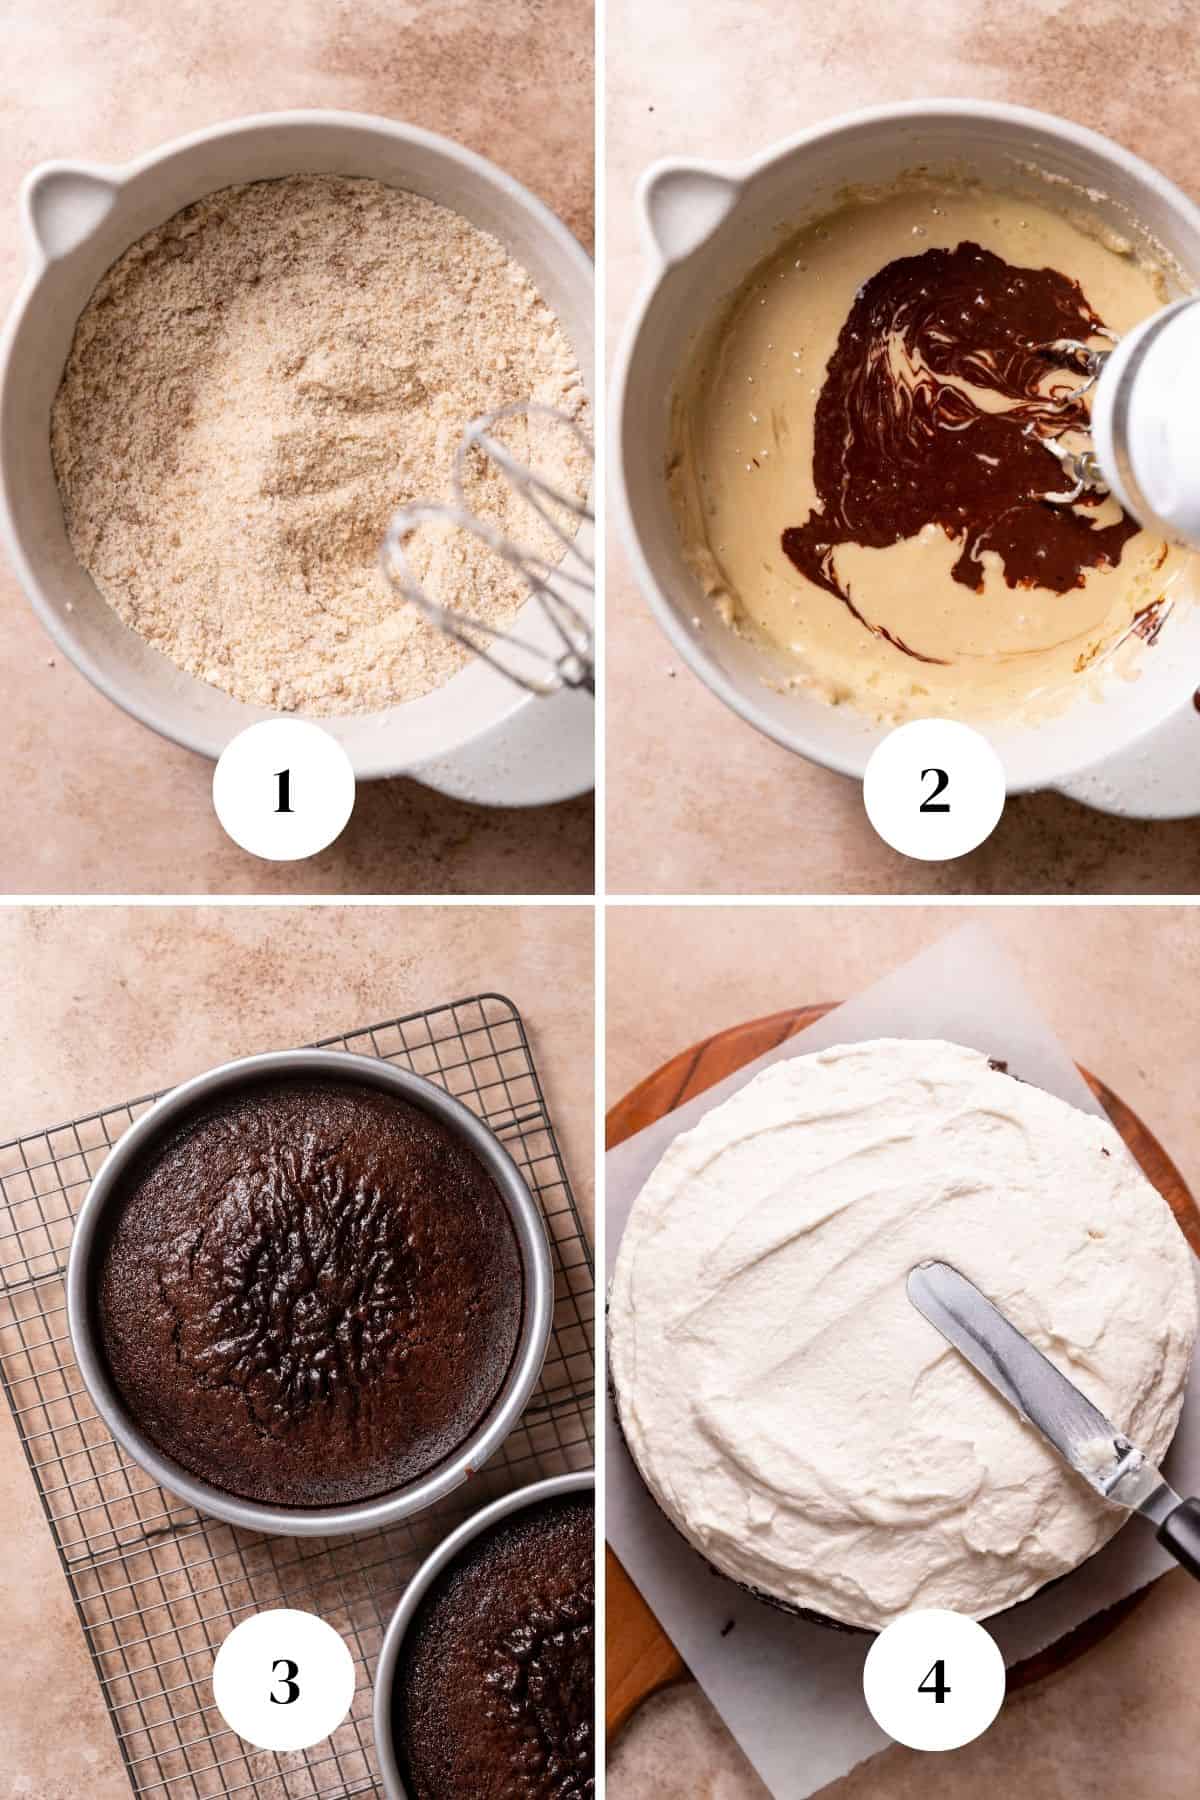 A process collage of the steps for making chocolate cake.